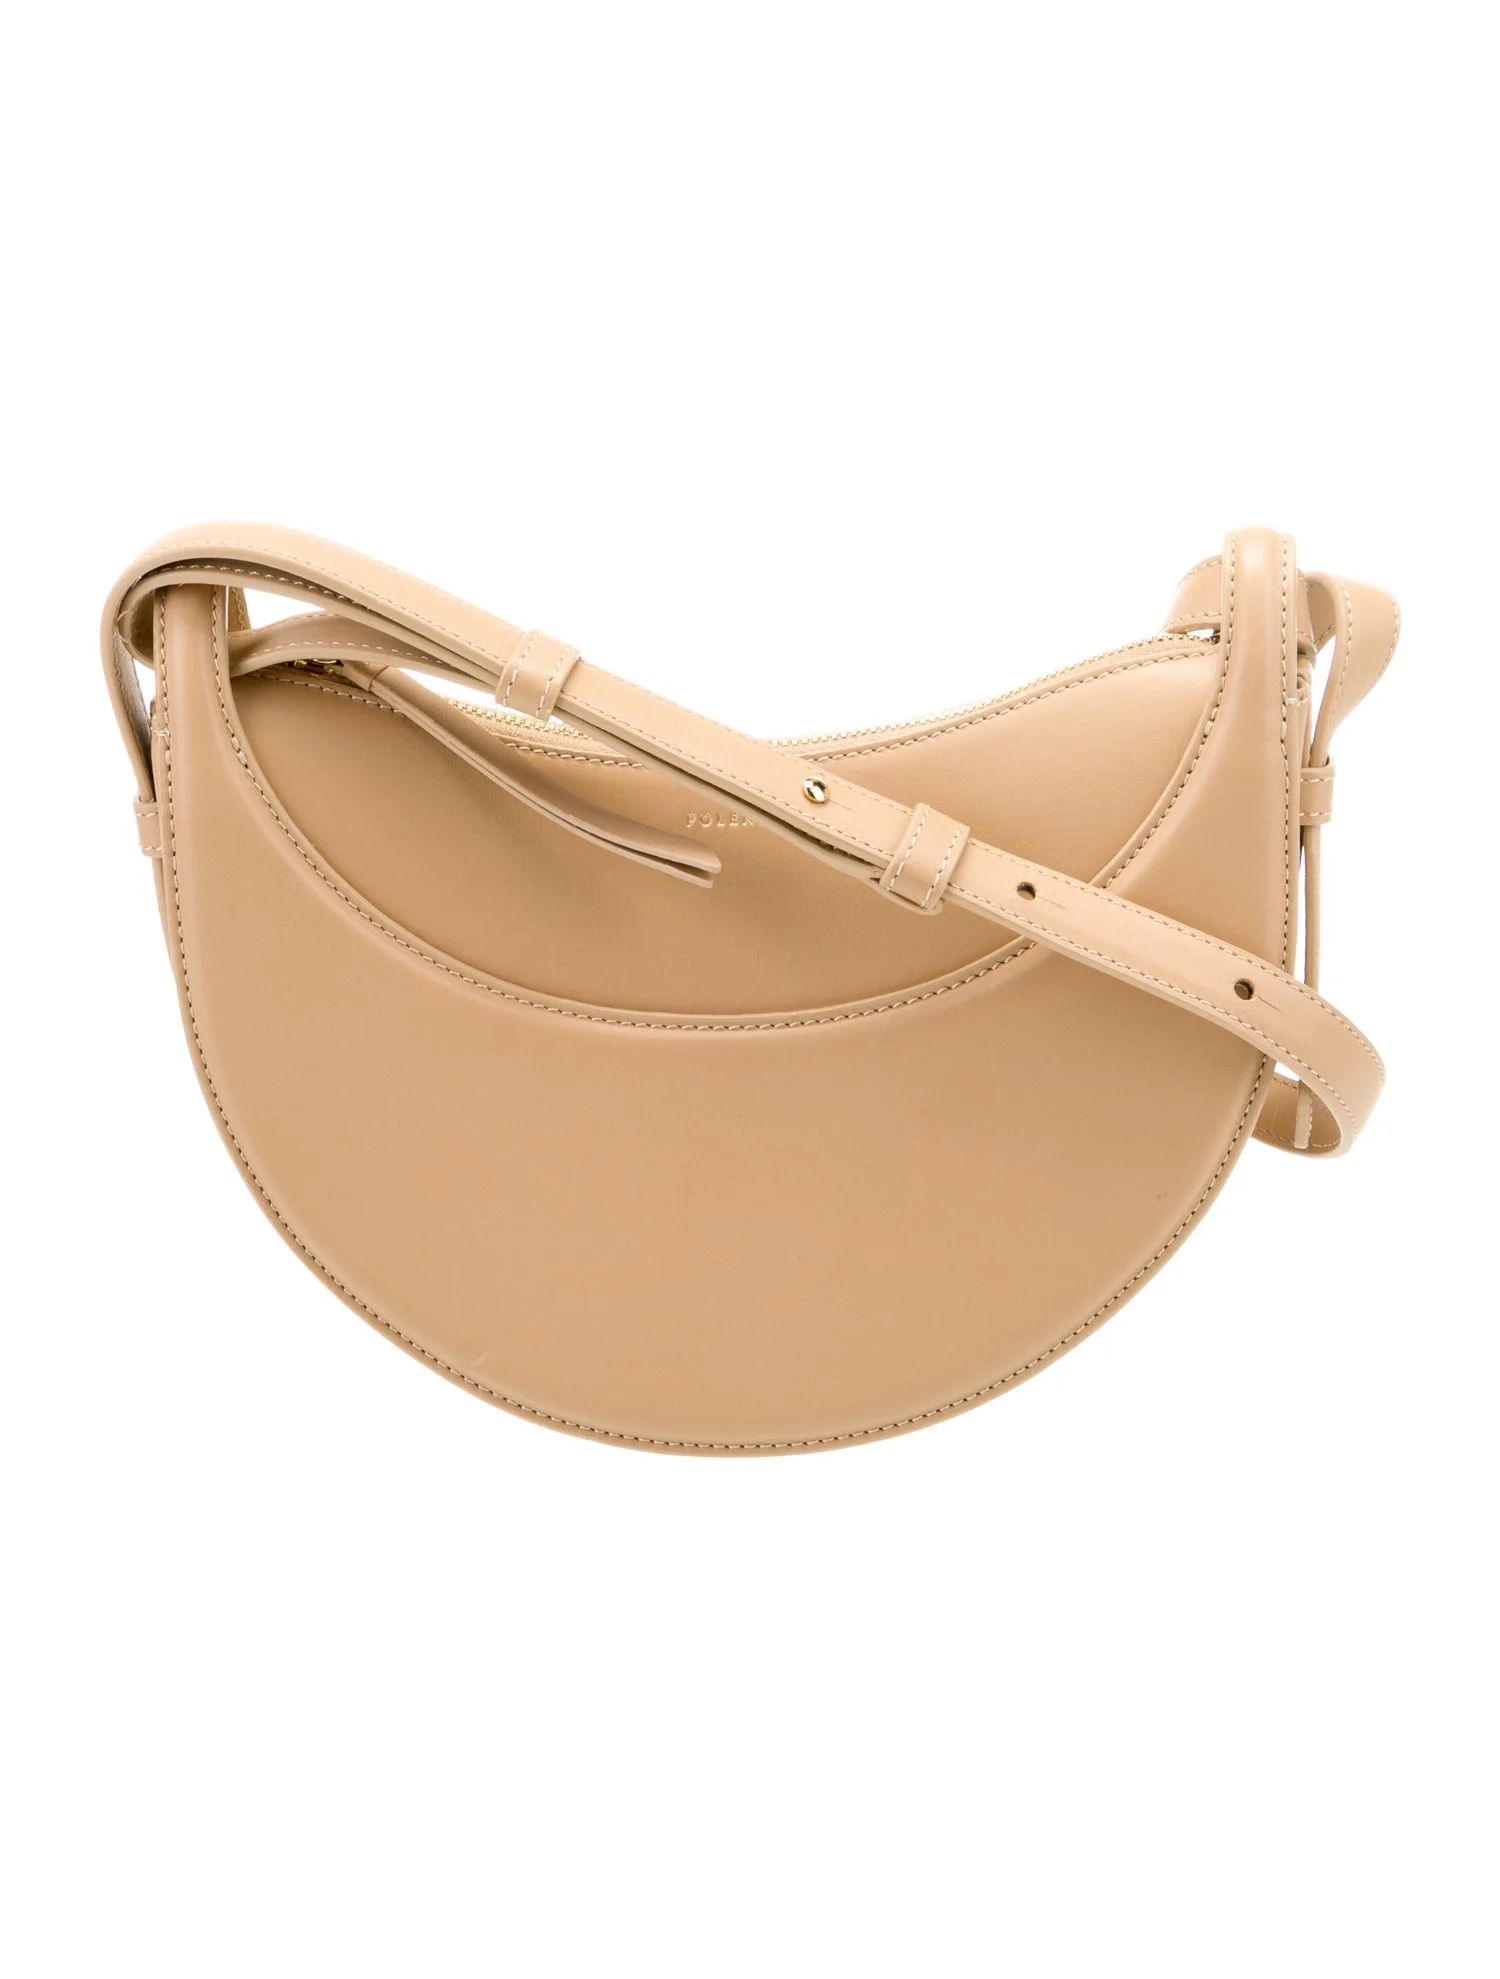 Solid Leather Crossbody Bag | The RealReal